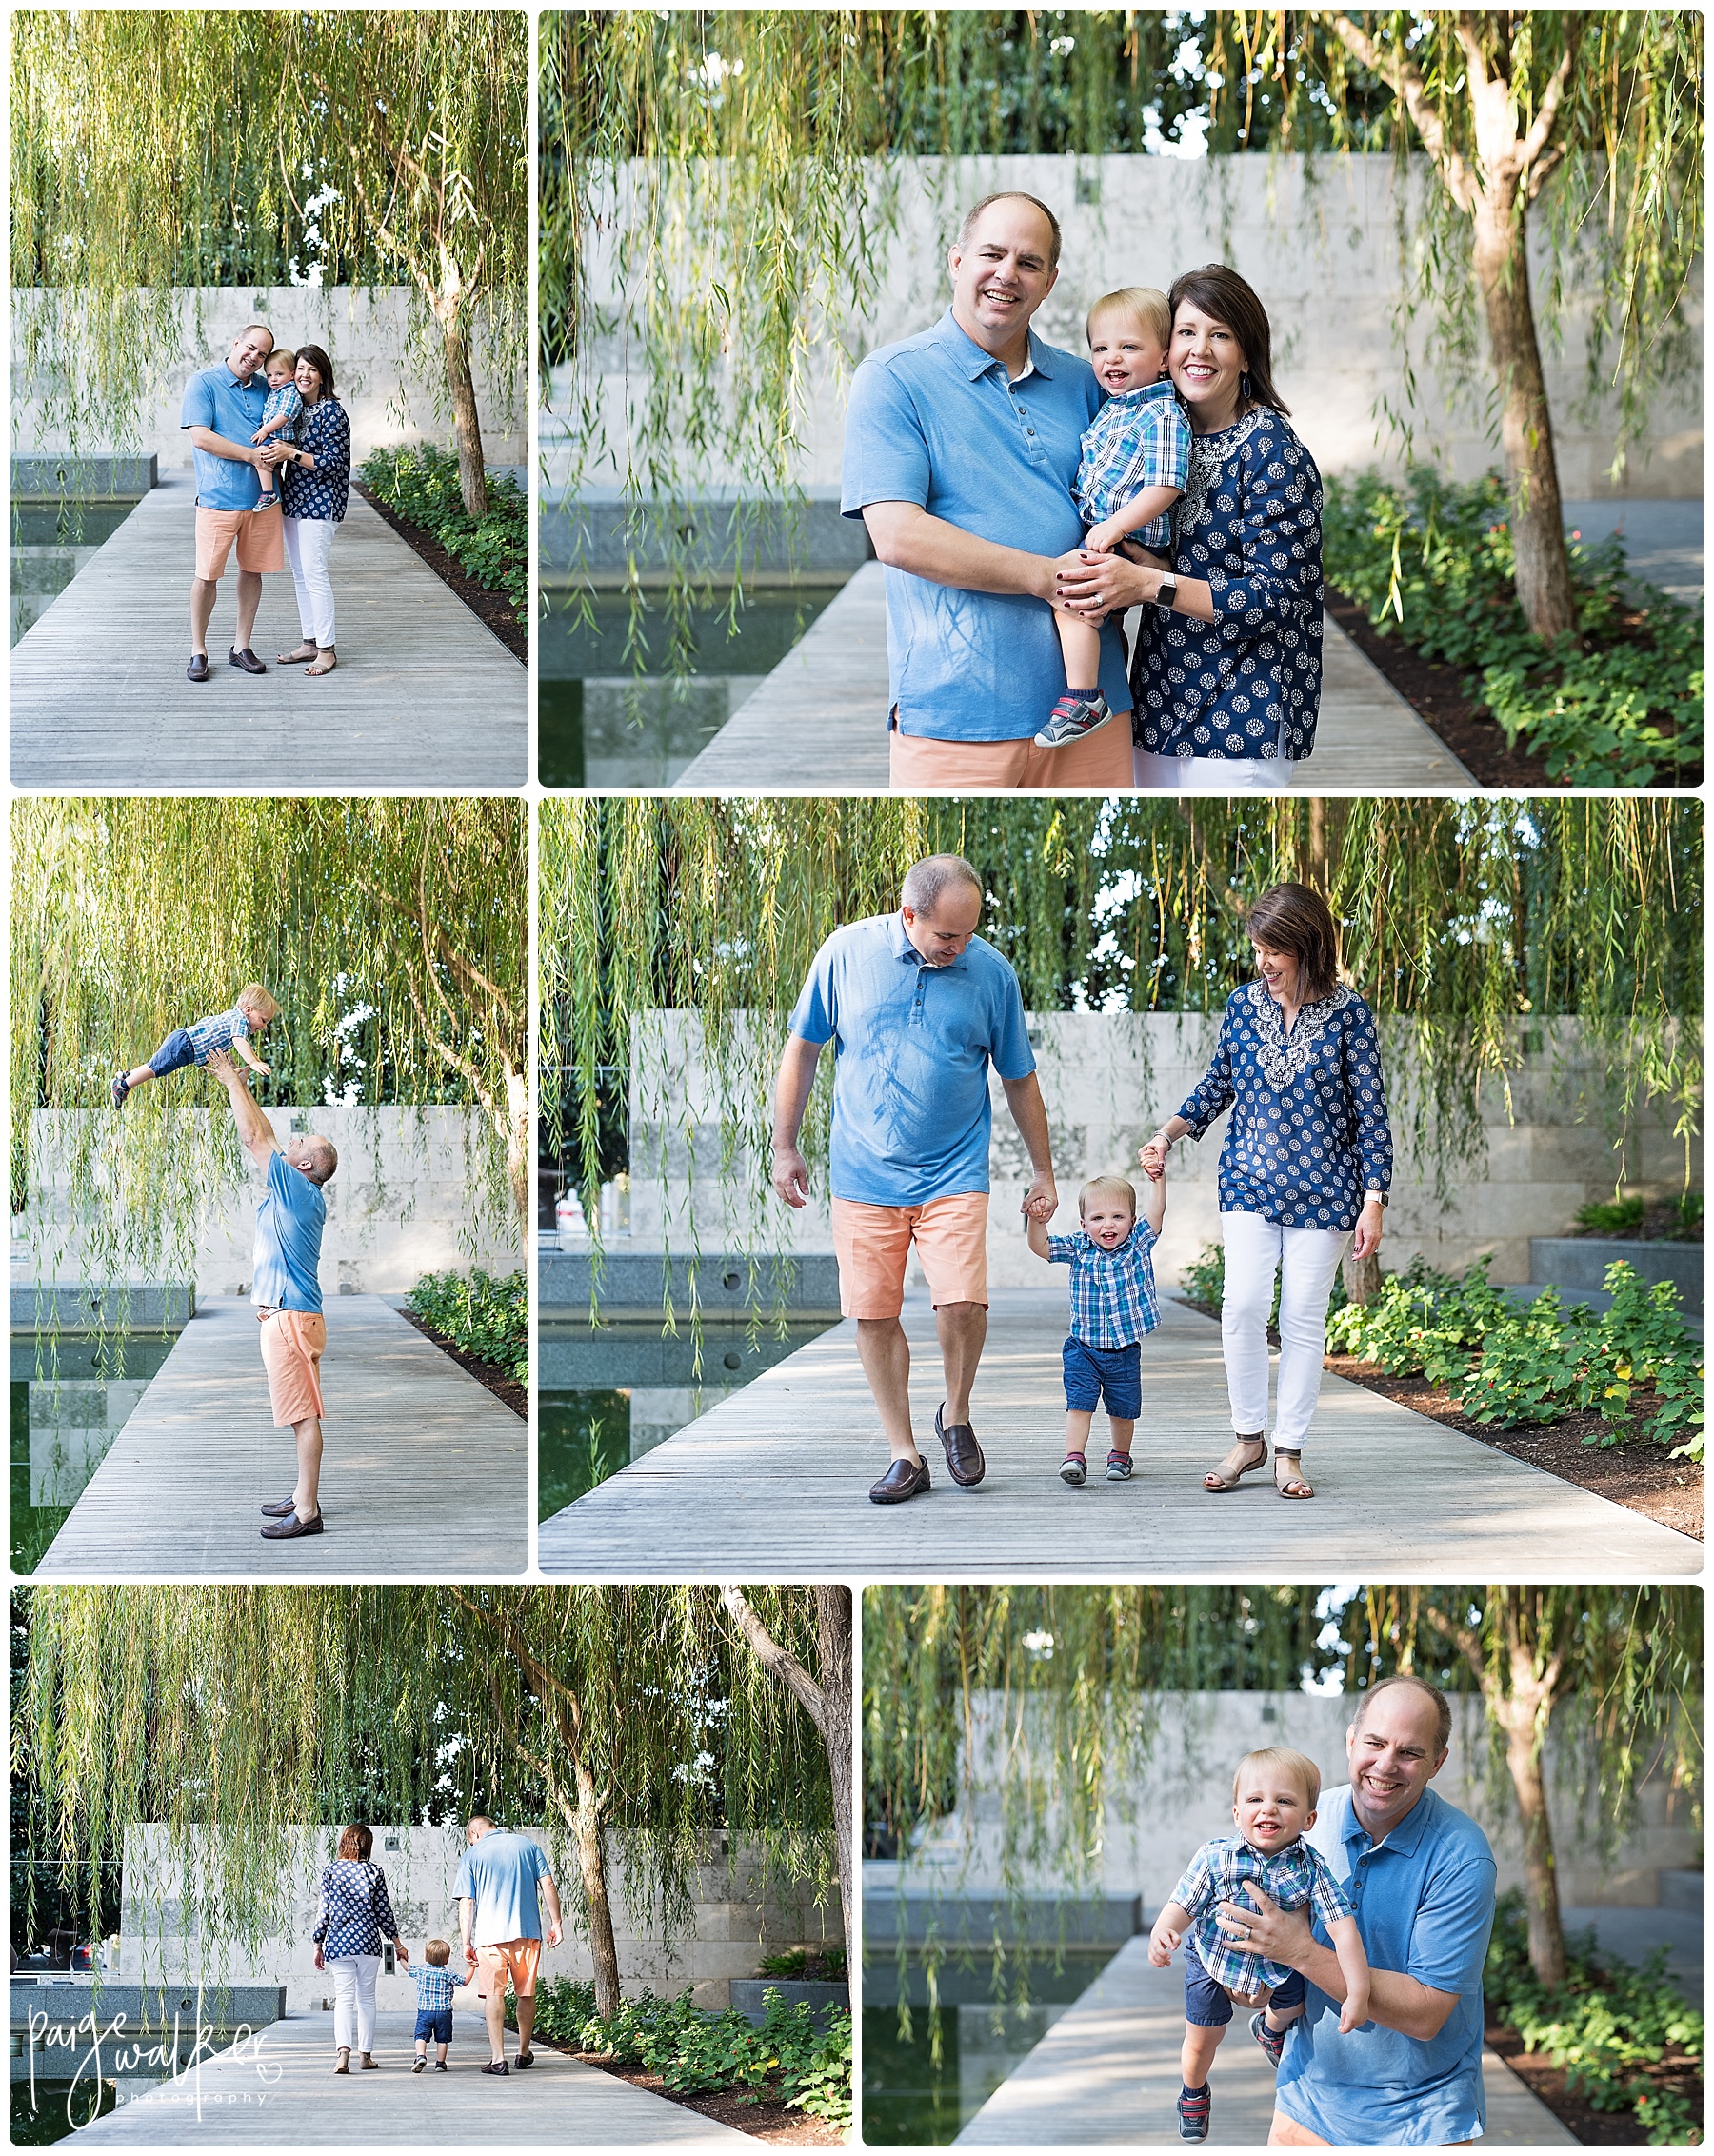 family walking together by a weeping willow tree